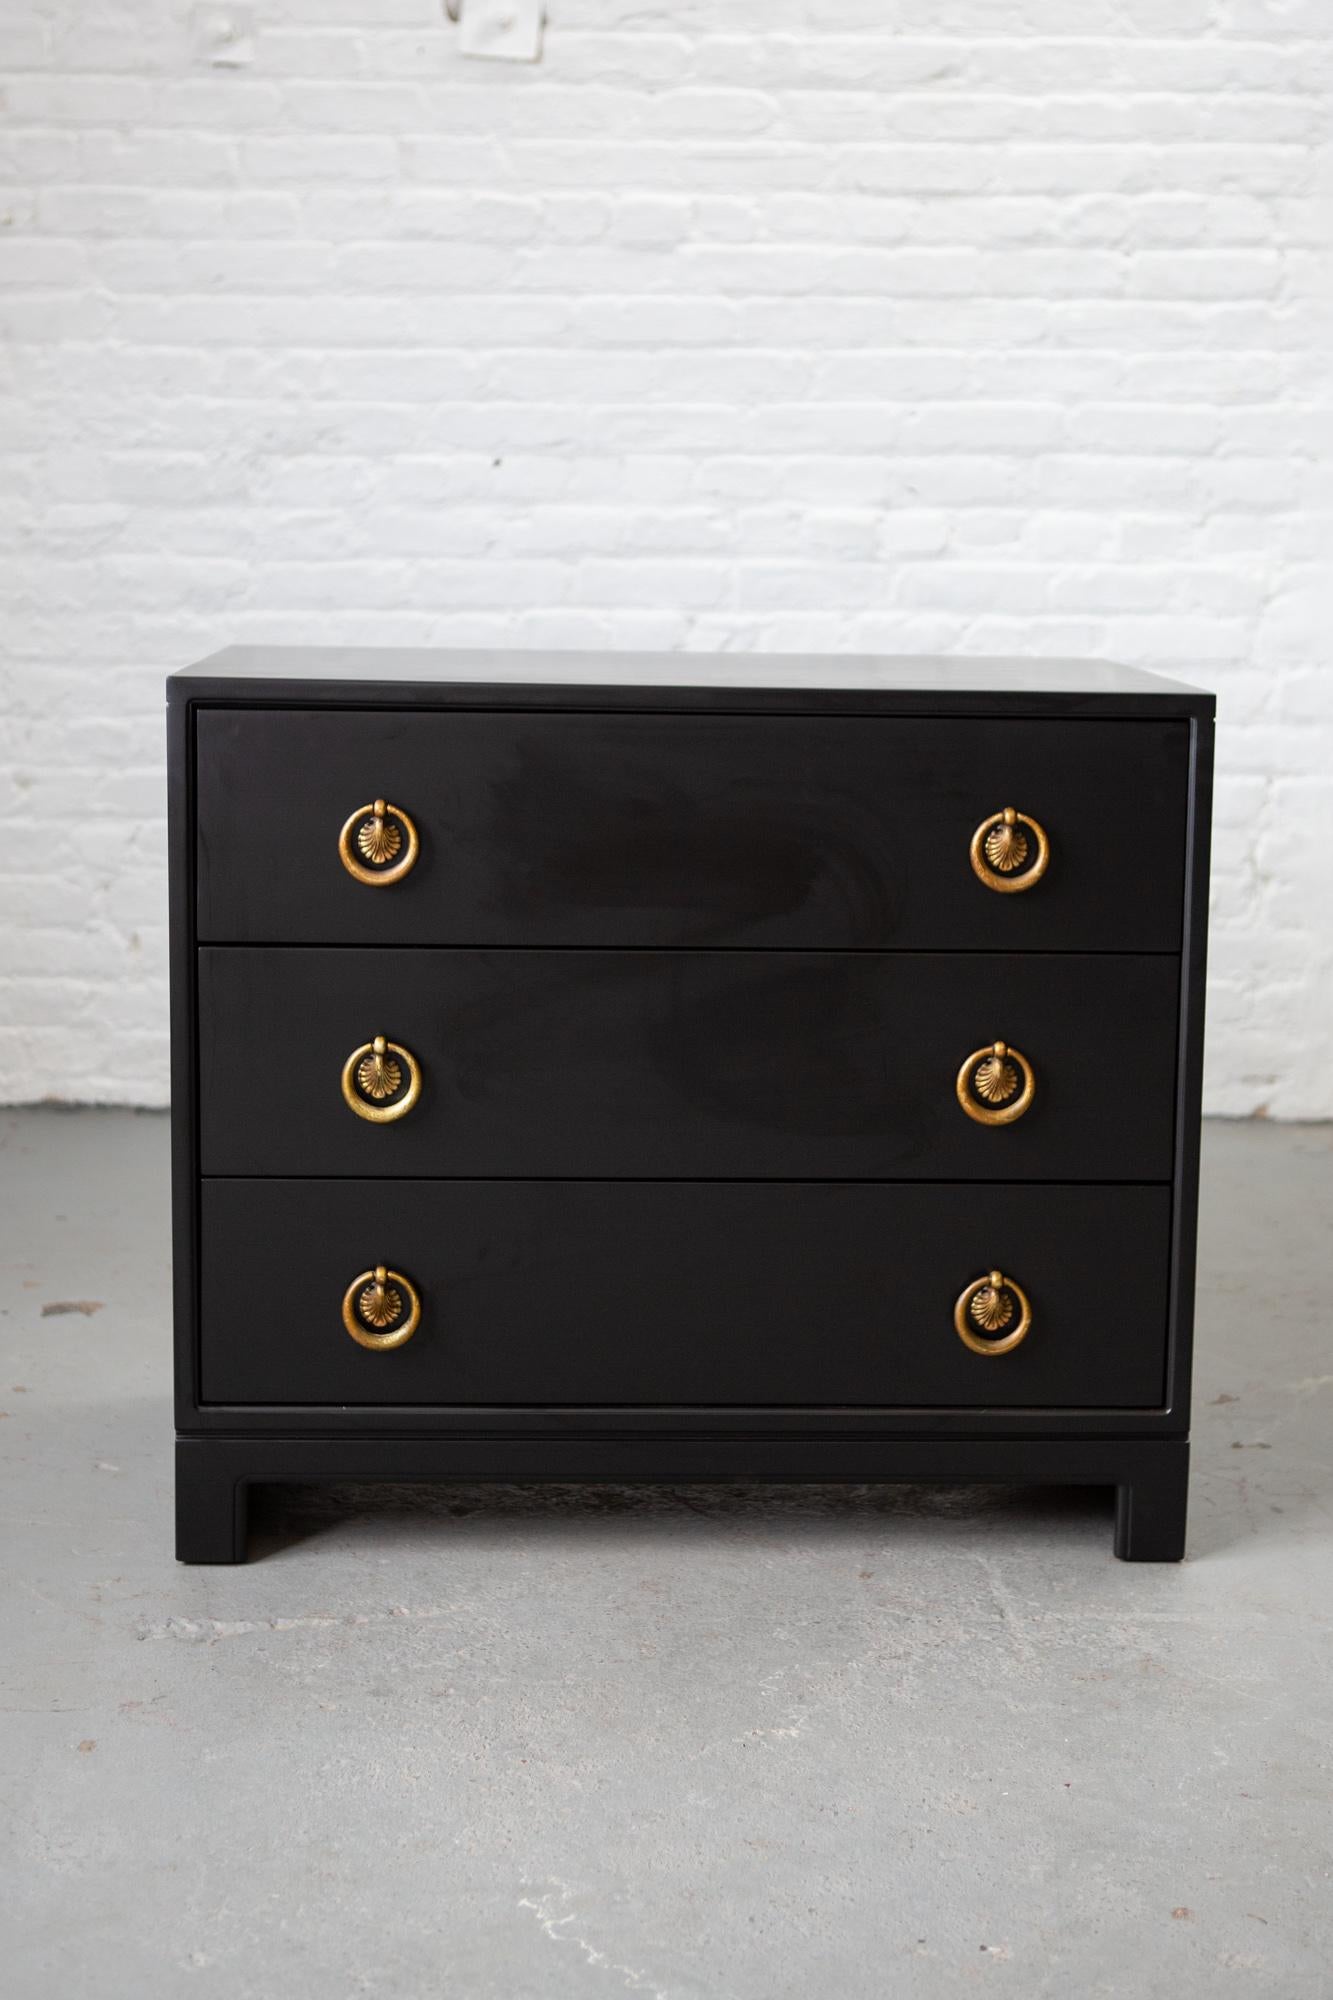 Black lacquered three-drawer midcentury chest of drawers with beautifully patinated gold ring pulls. Very handsome and sturdy piece!